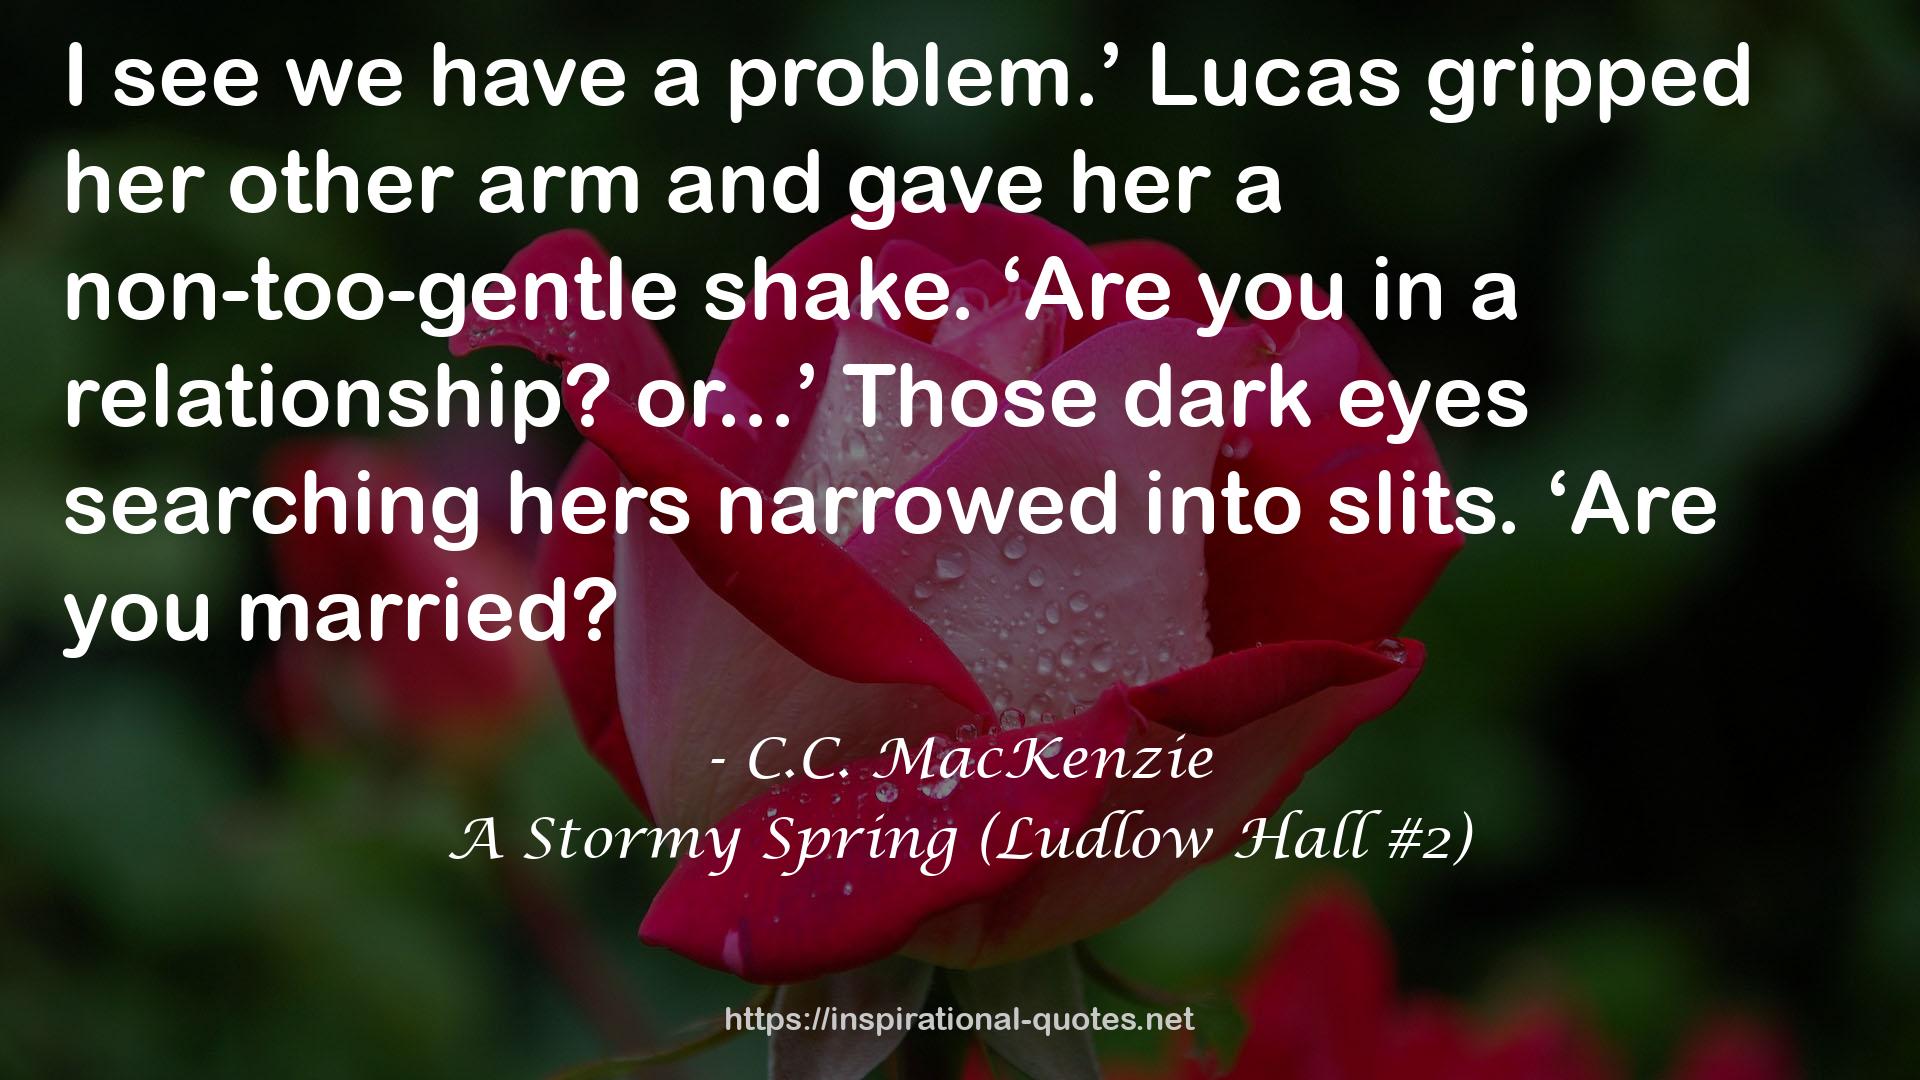 A Stormy Spring (Ludlow Hall #2) QUOTES